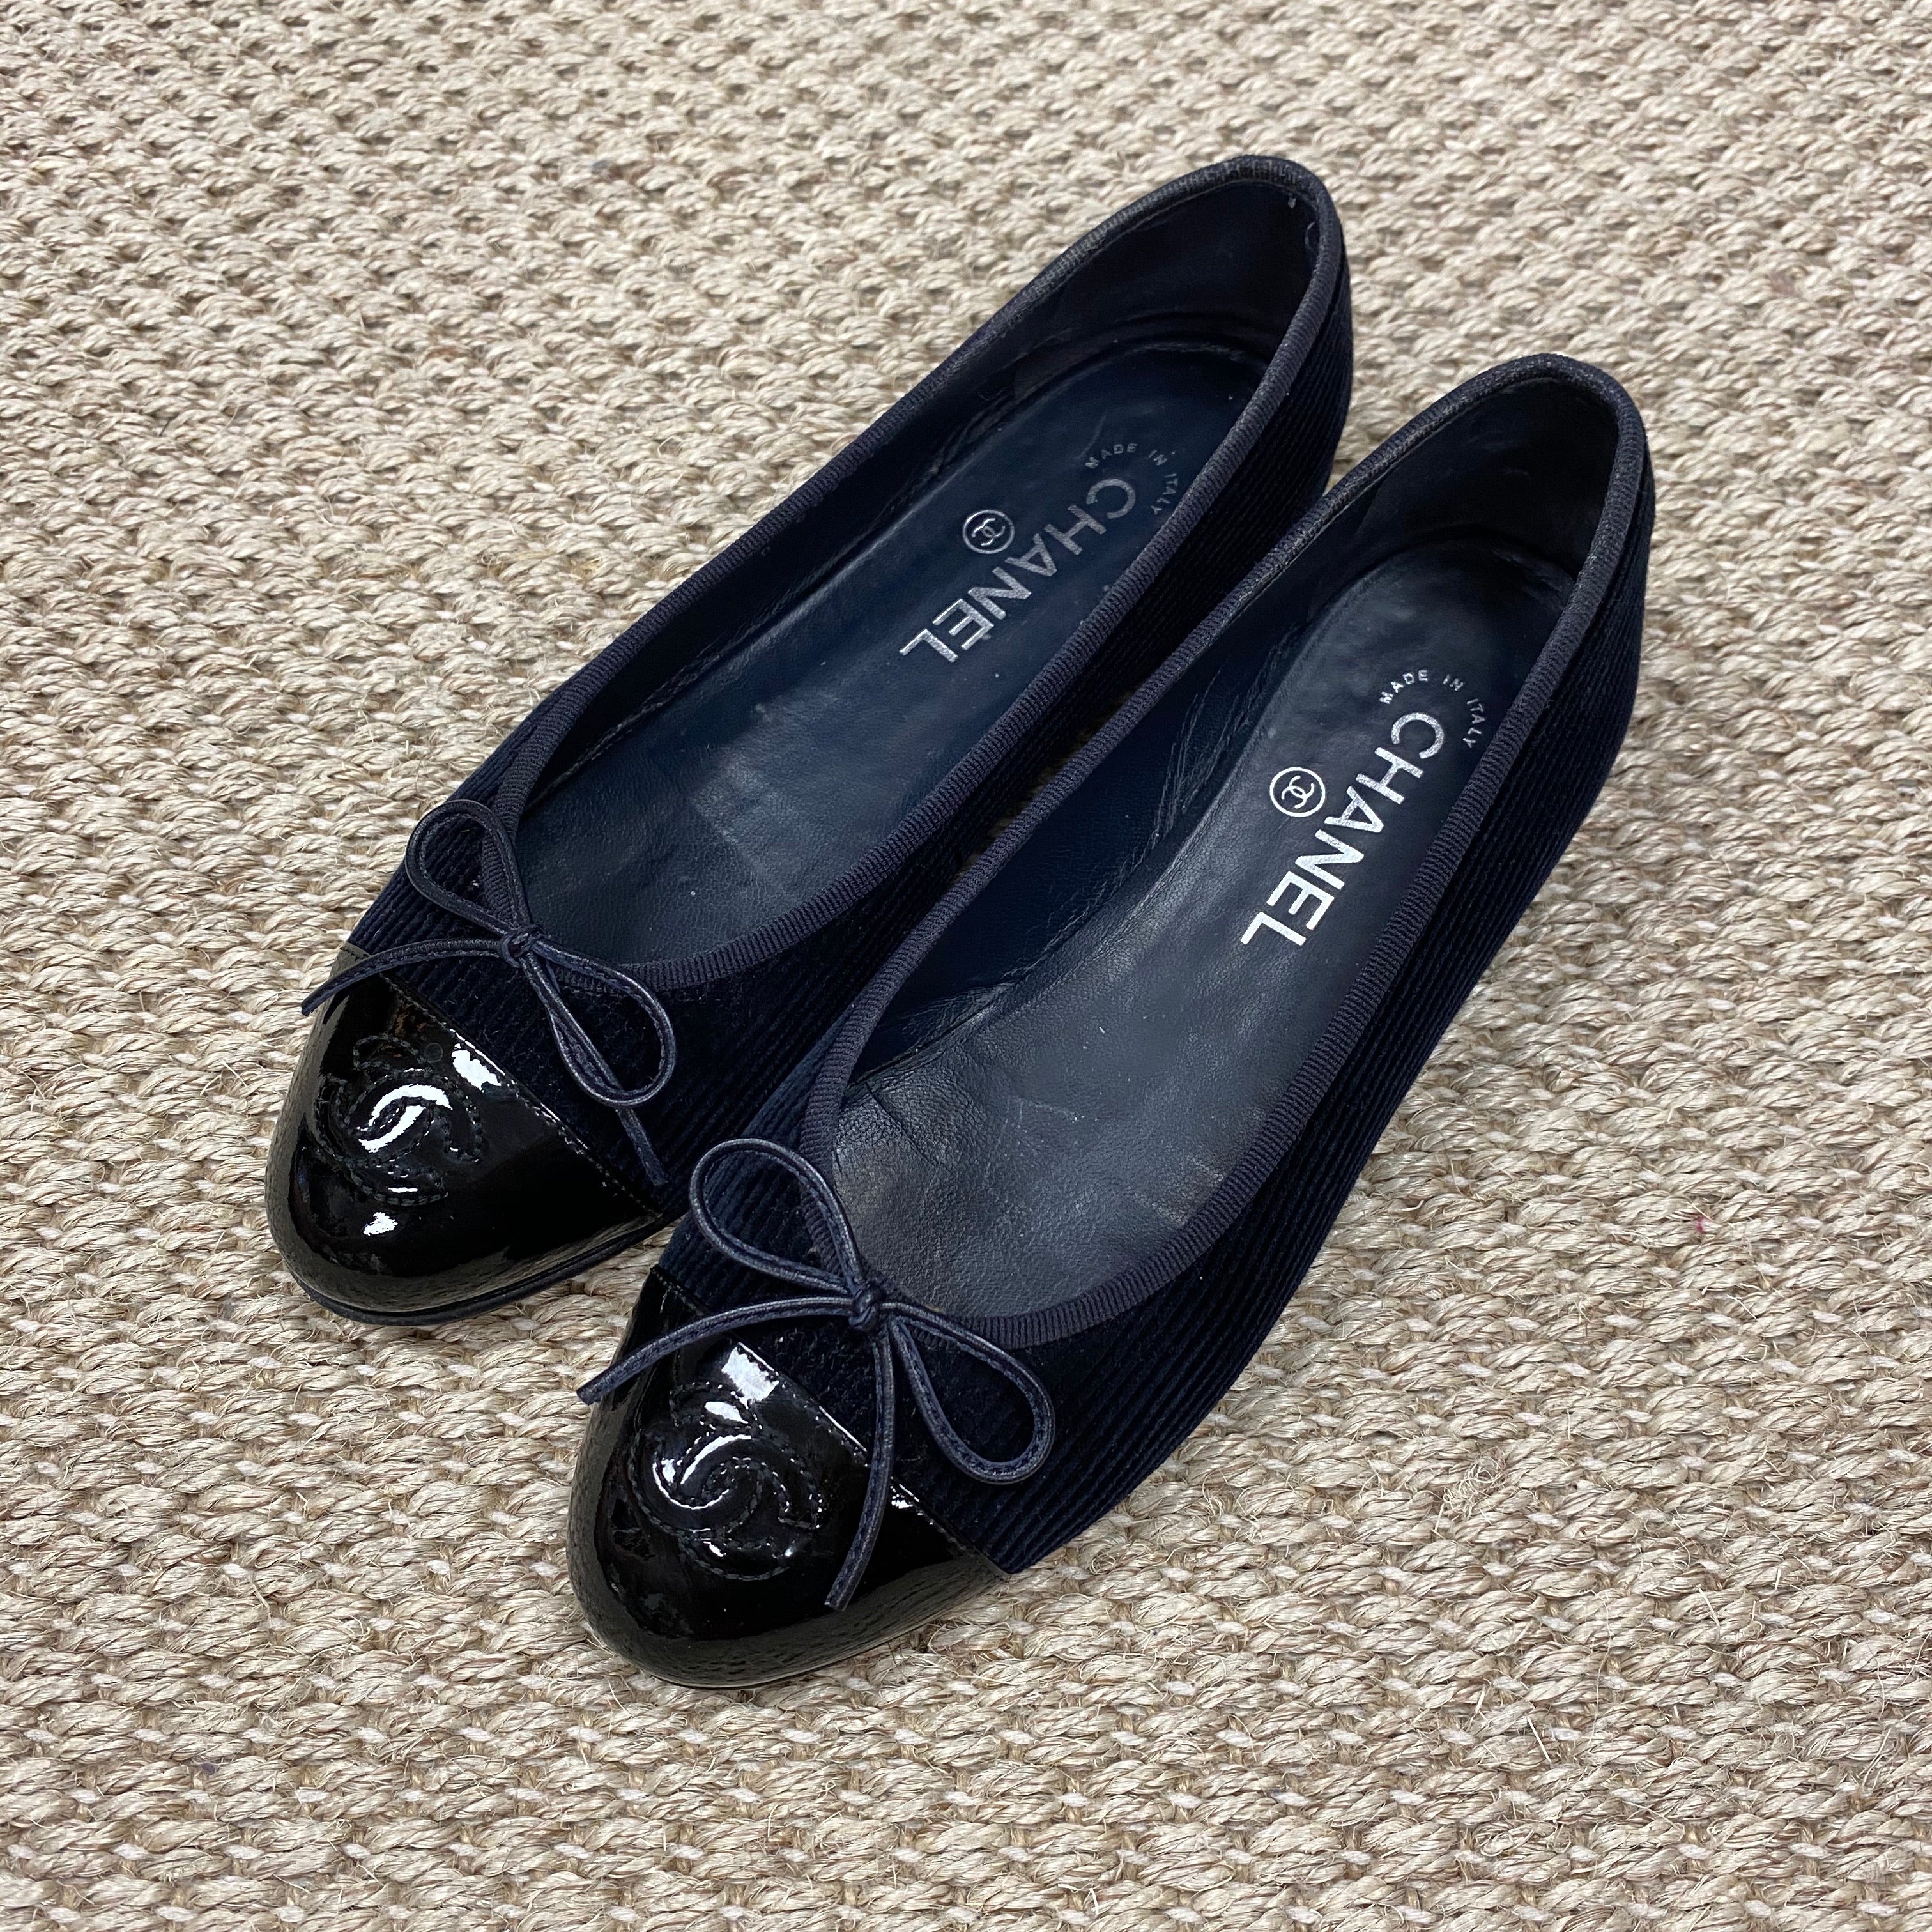 Ballet Flats That Could be Dupes for Chanel - Above the Plum Tree